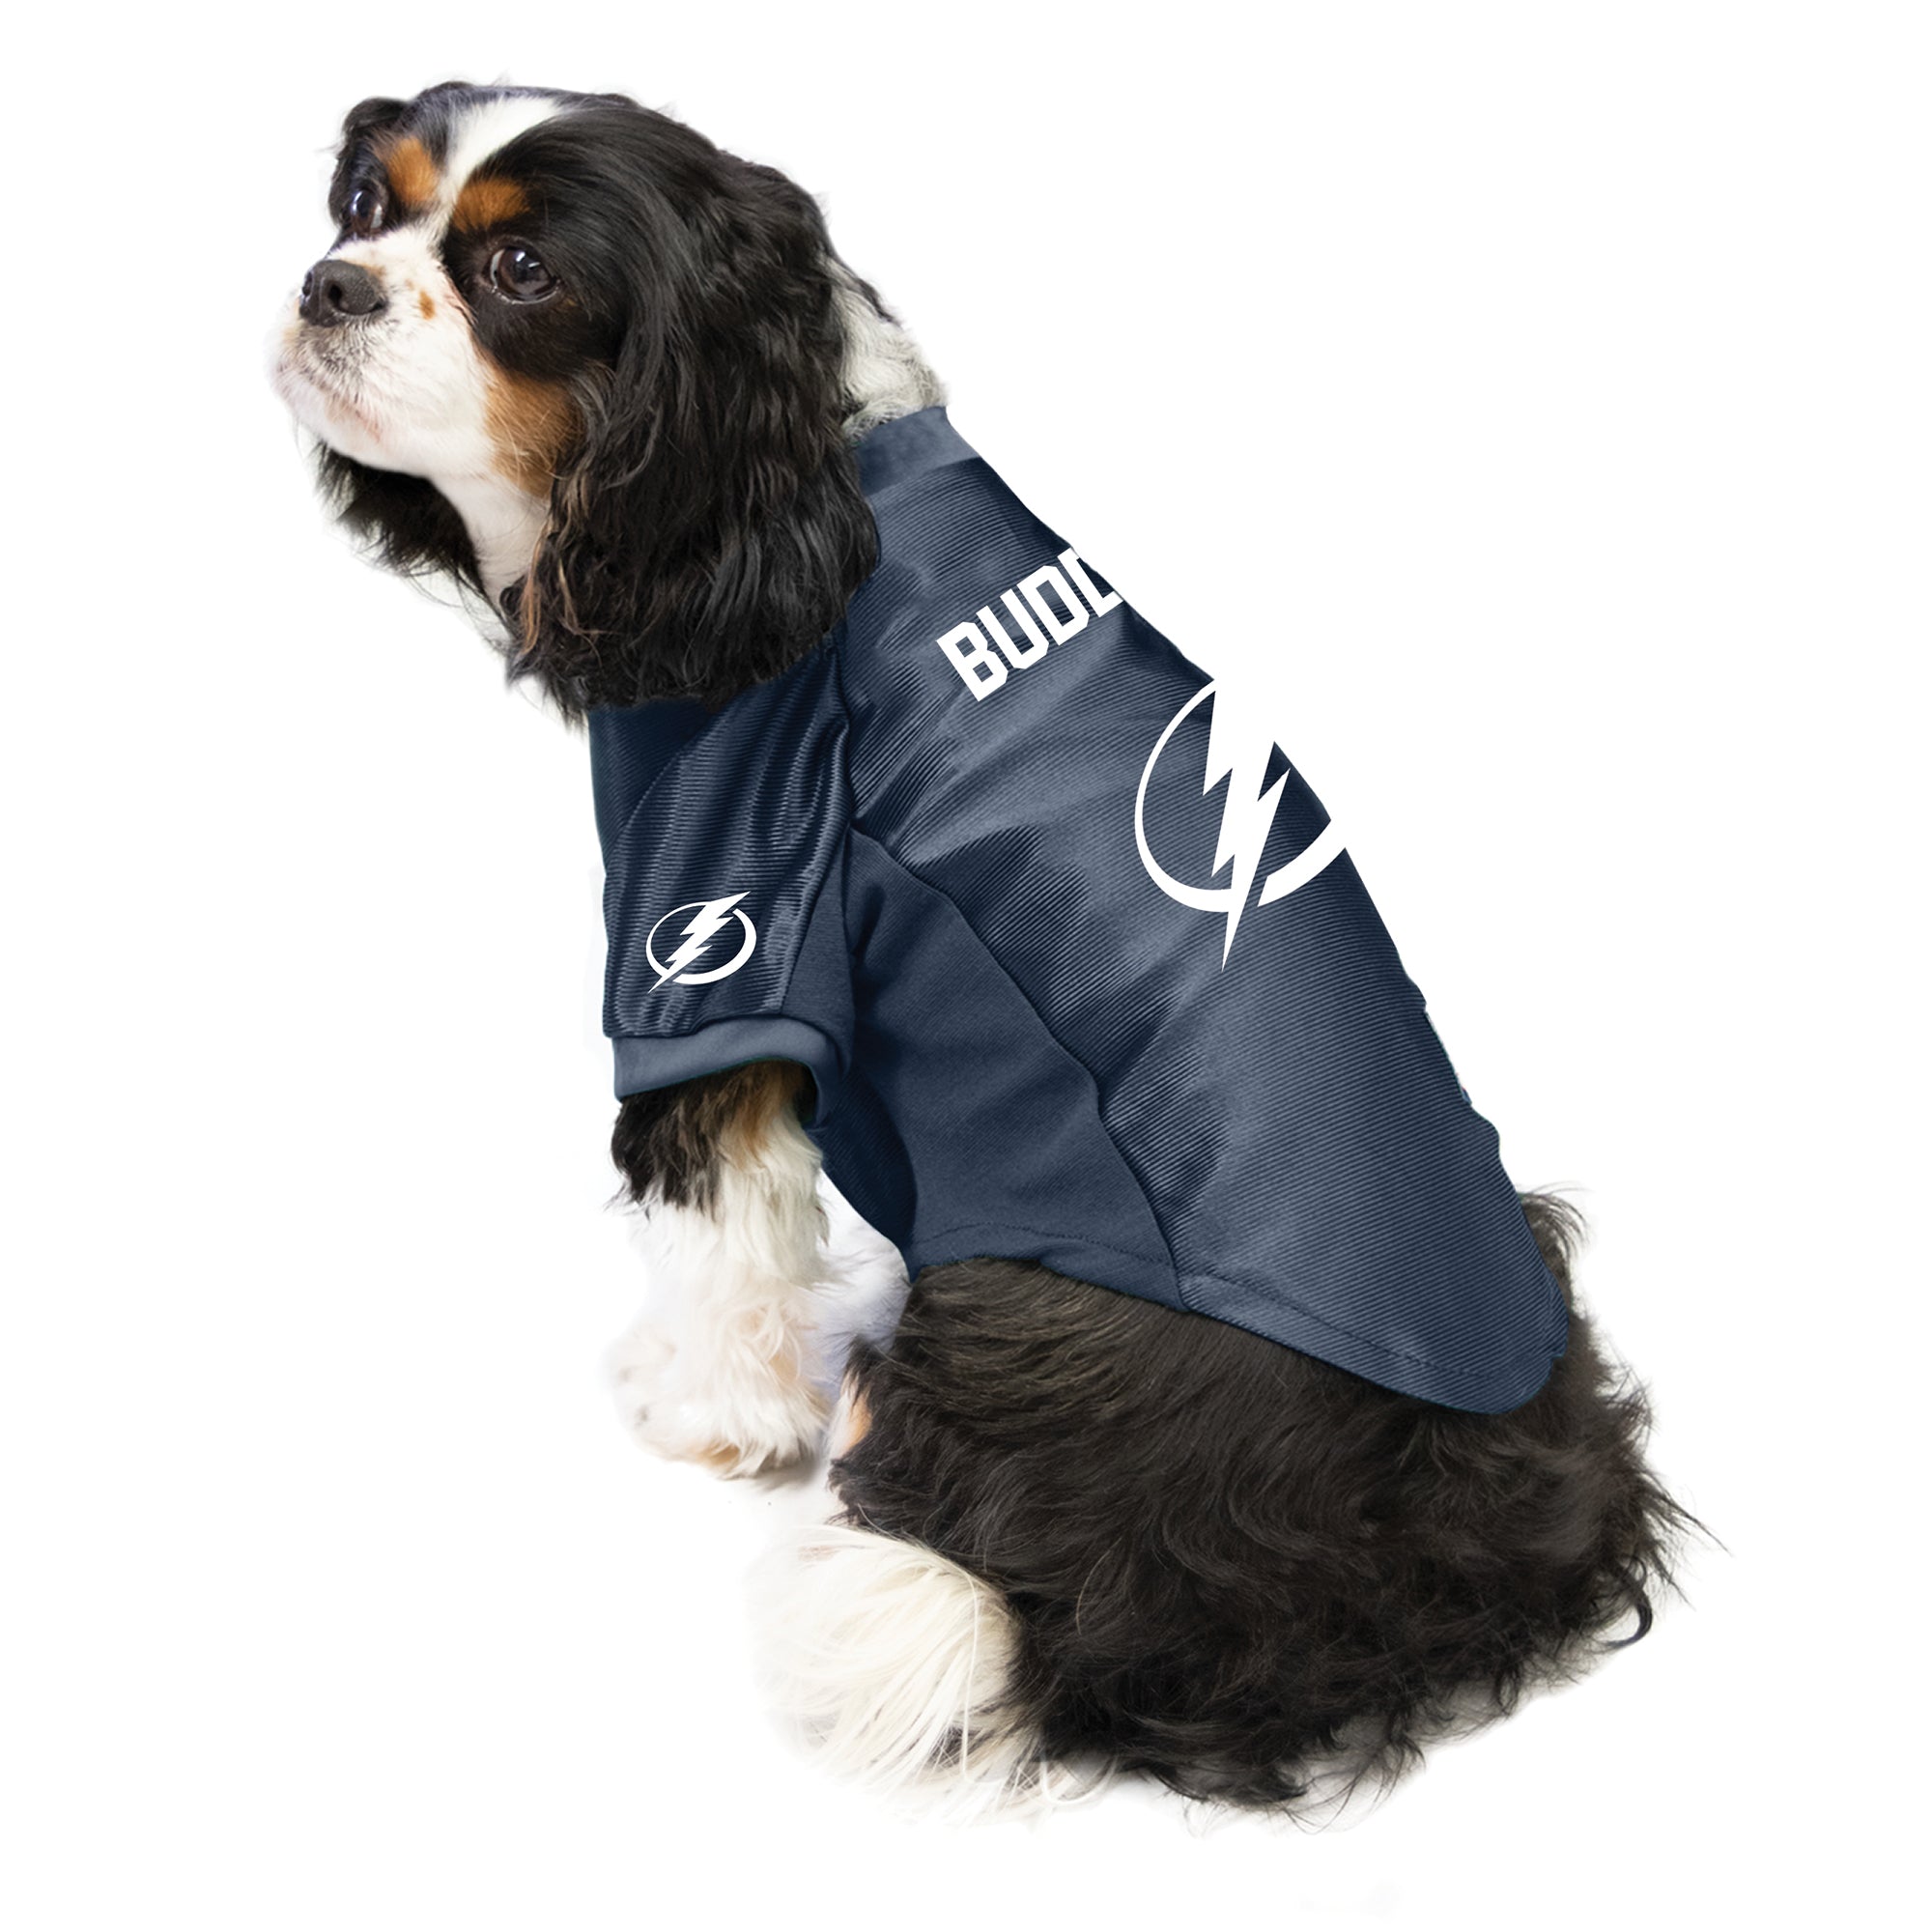 All Star Dogs: Tampa Bay Lightning Pet Products